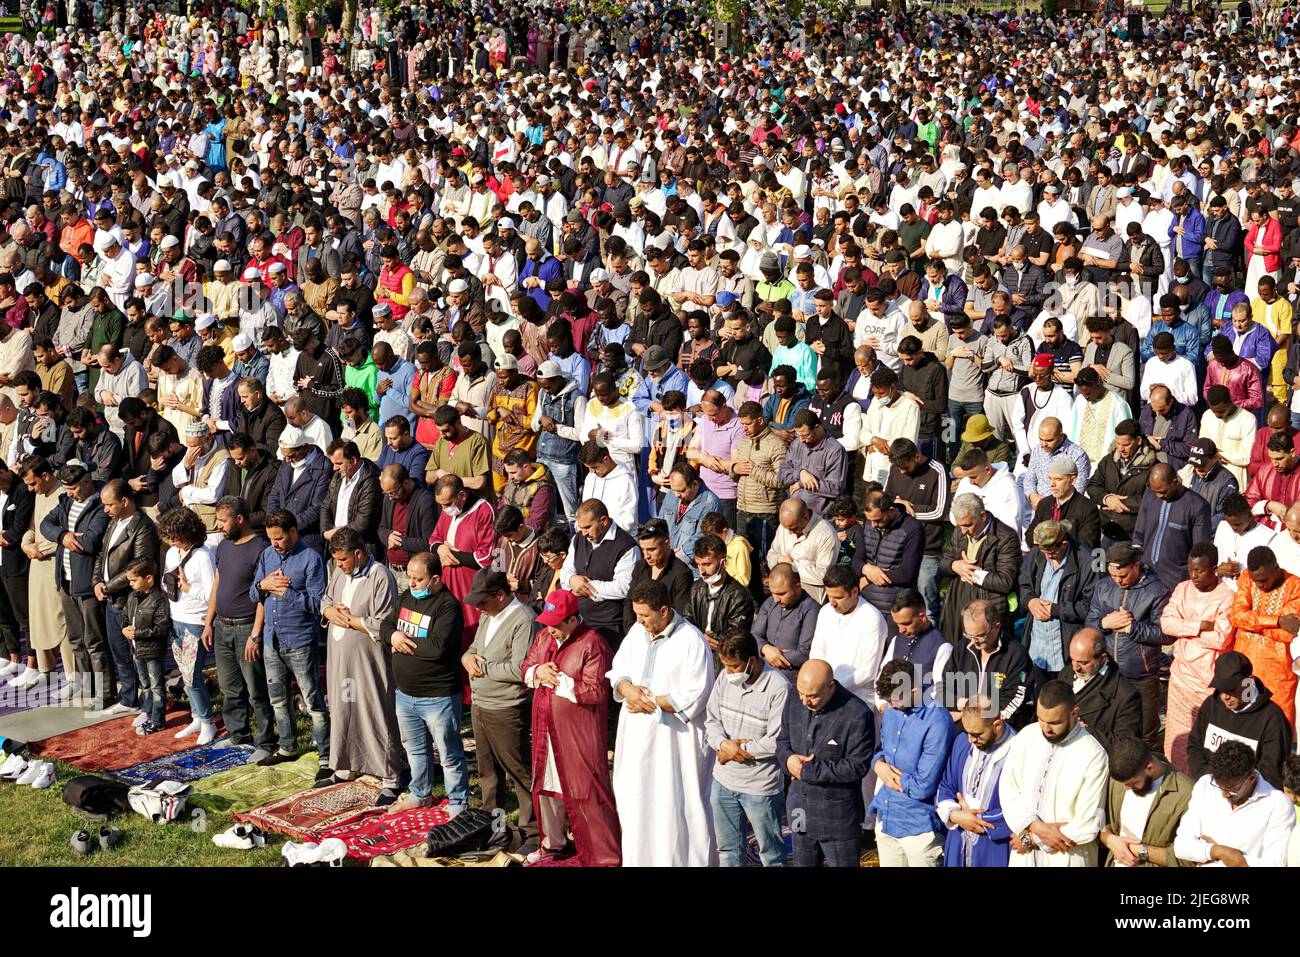 Muslims praying to celebrate the end of Ramadan. Turin, Italy - May 2022 Stock Photo